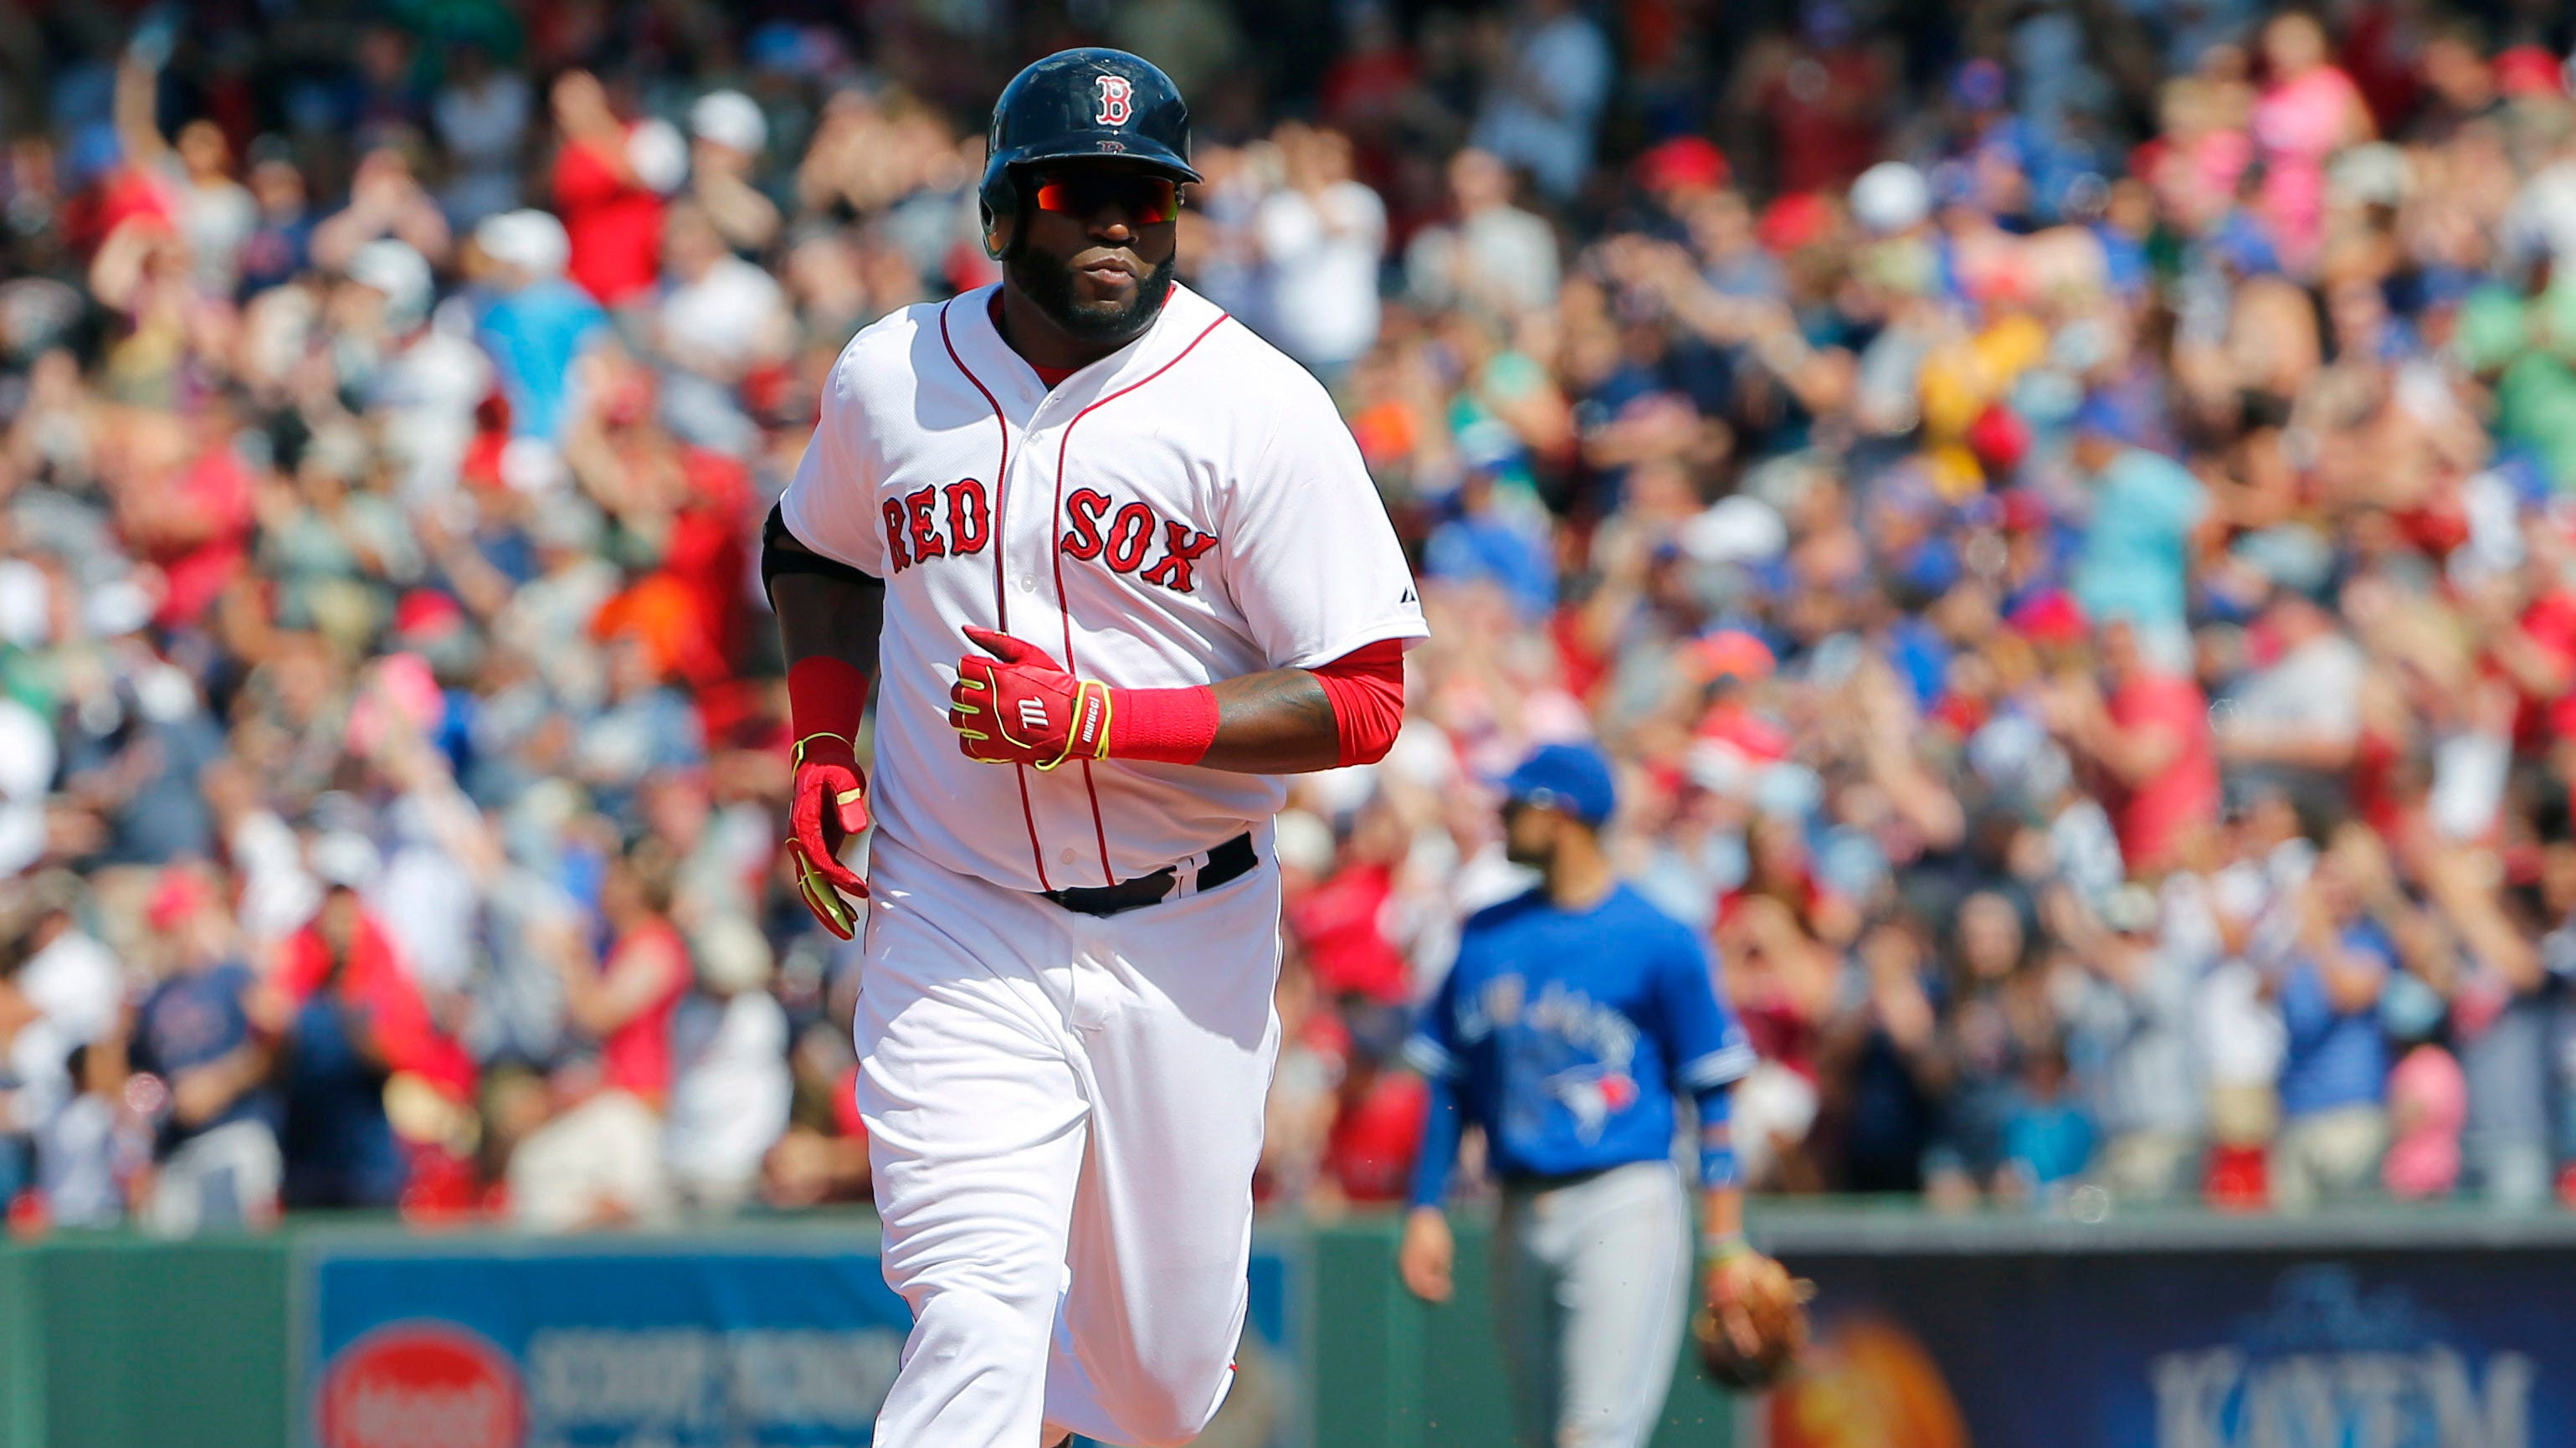 Glove oiled, David Ortiz on the DH, pitchers hitting and October